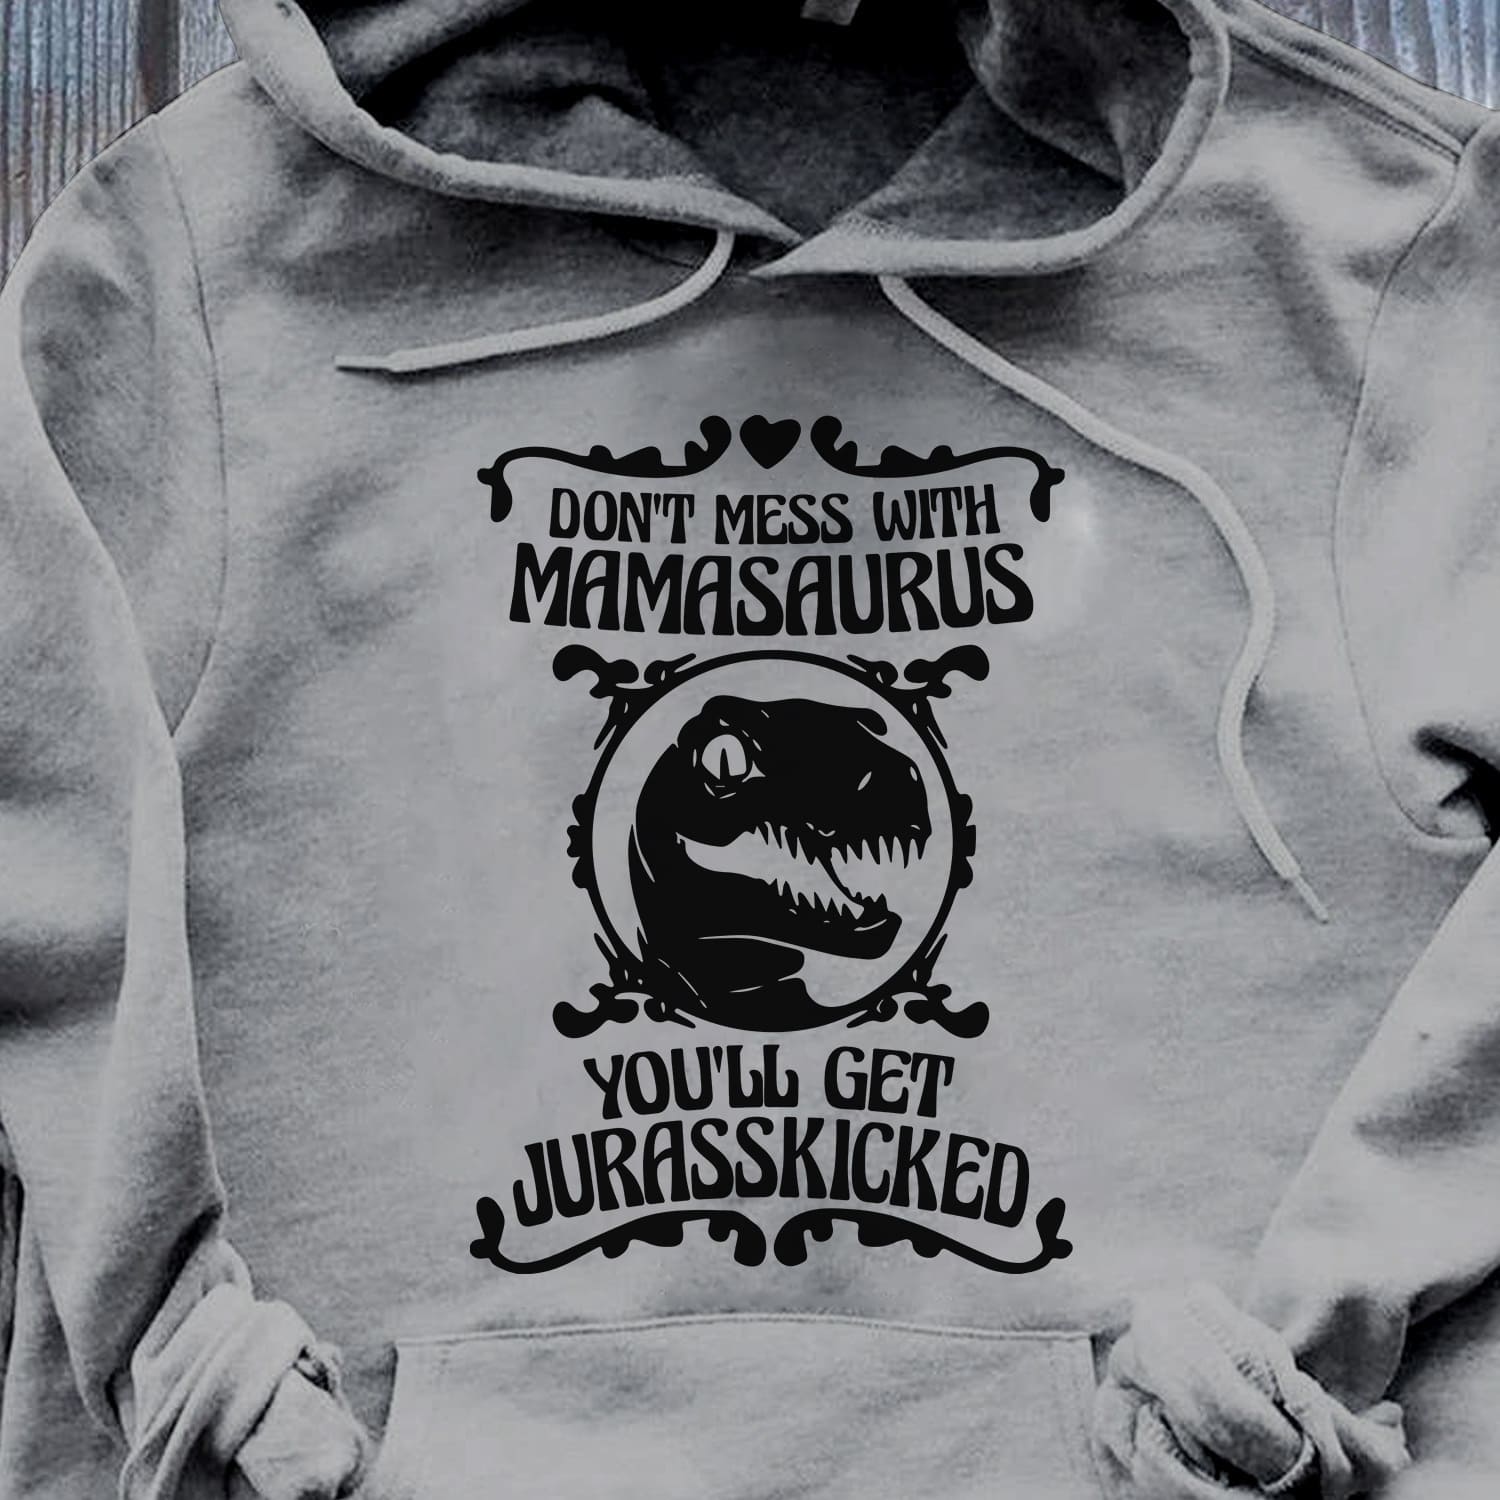 Dinosaurs Graphic T-shirt - Don't mess with mamasaurus you'll get jurasskicked